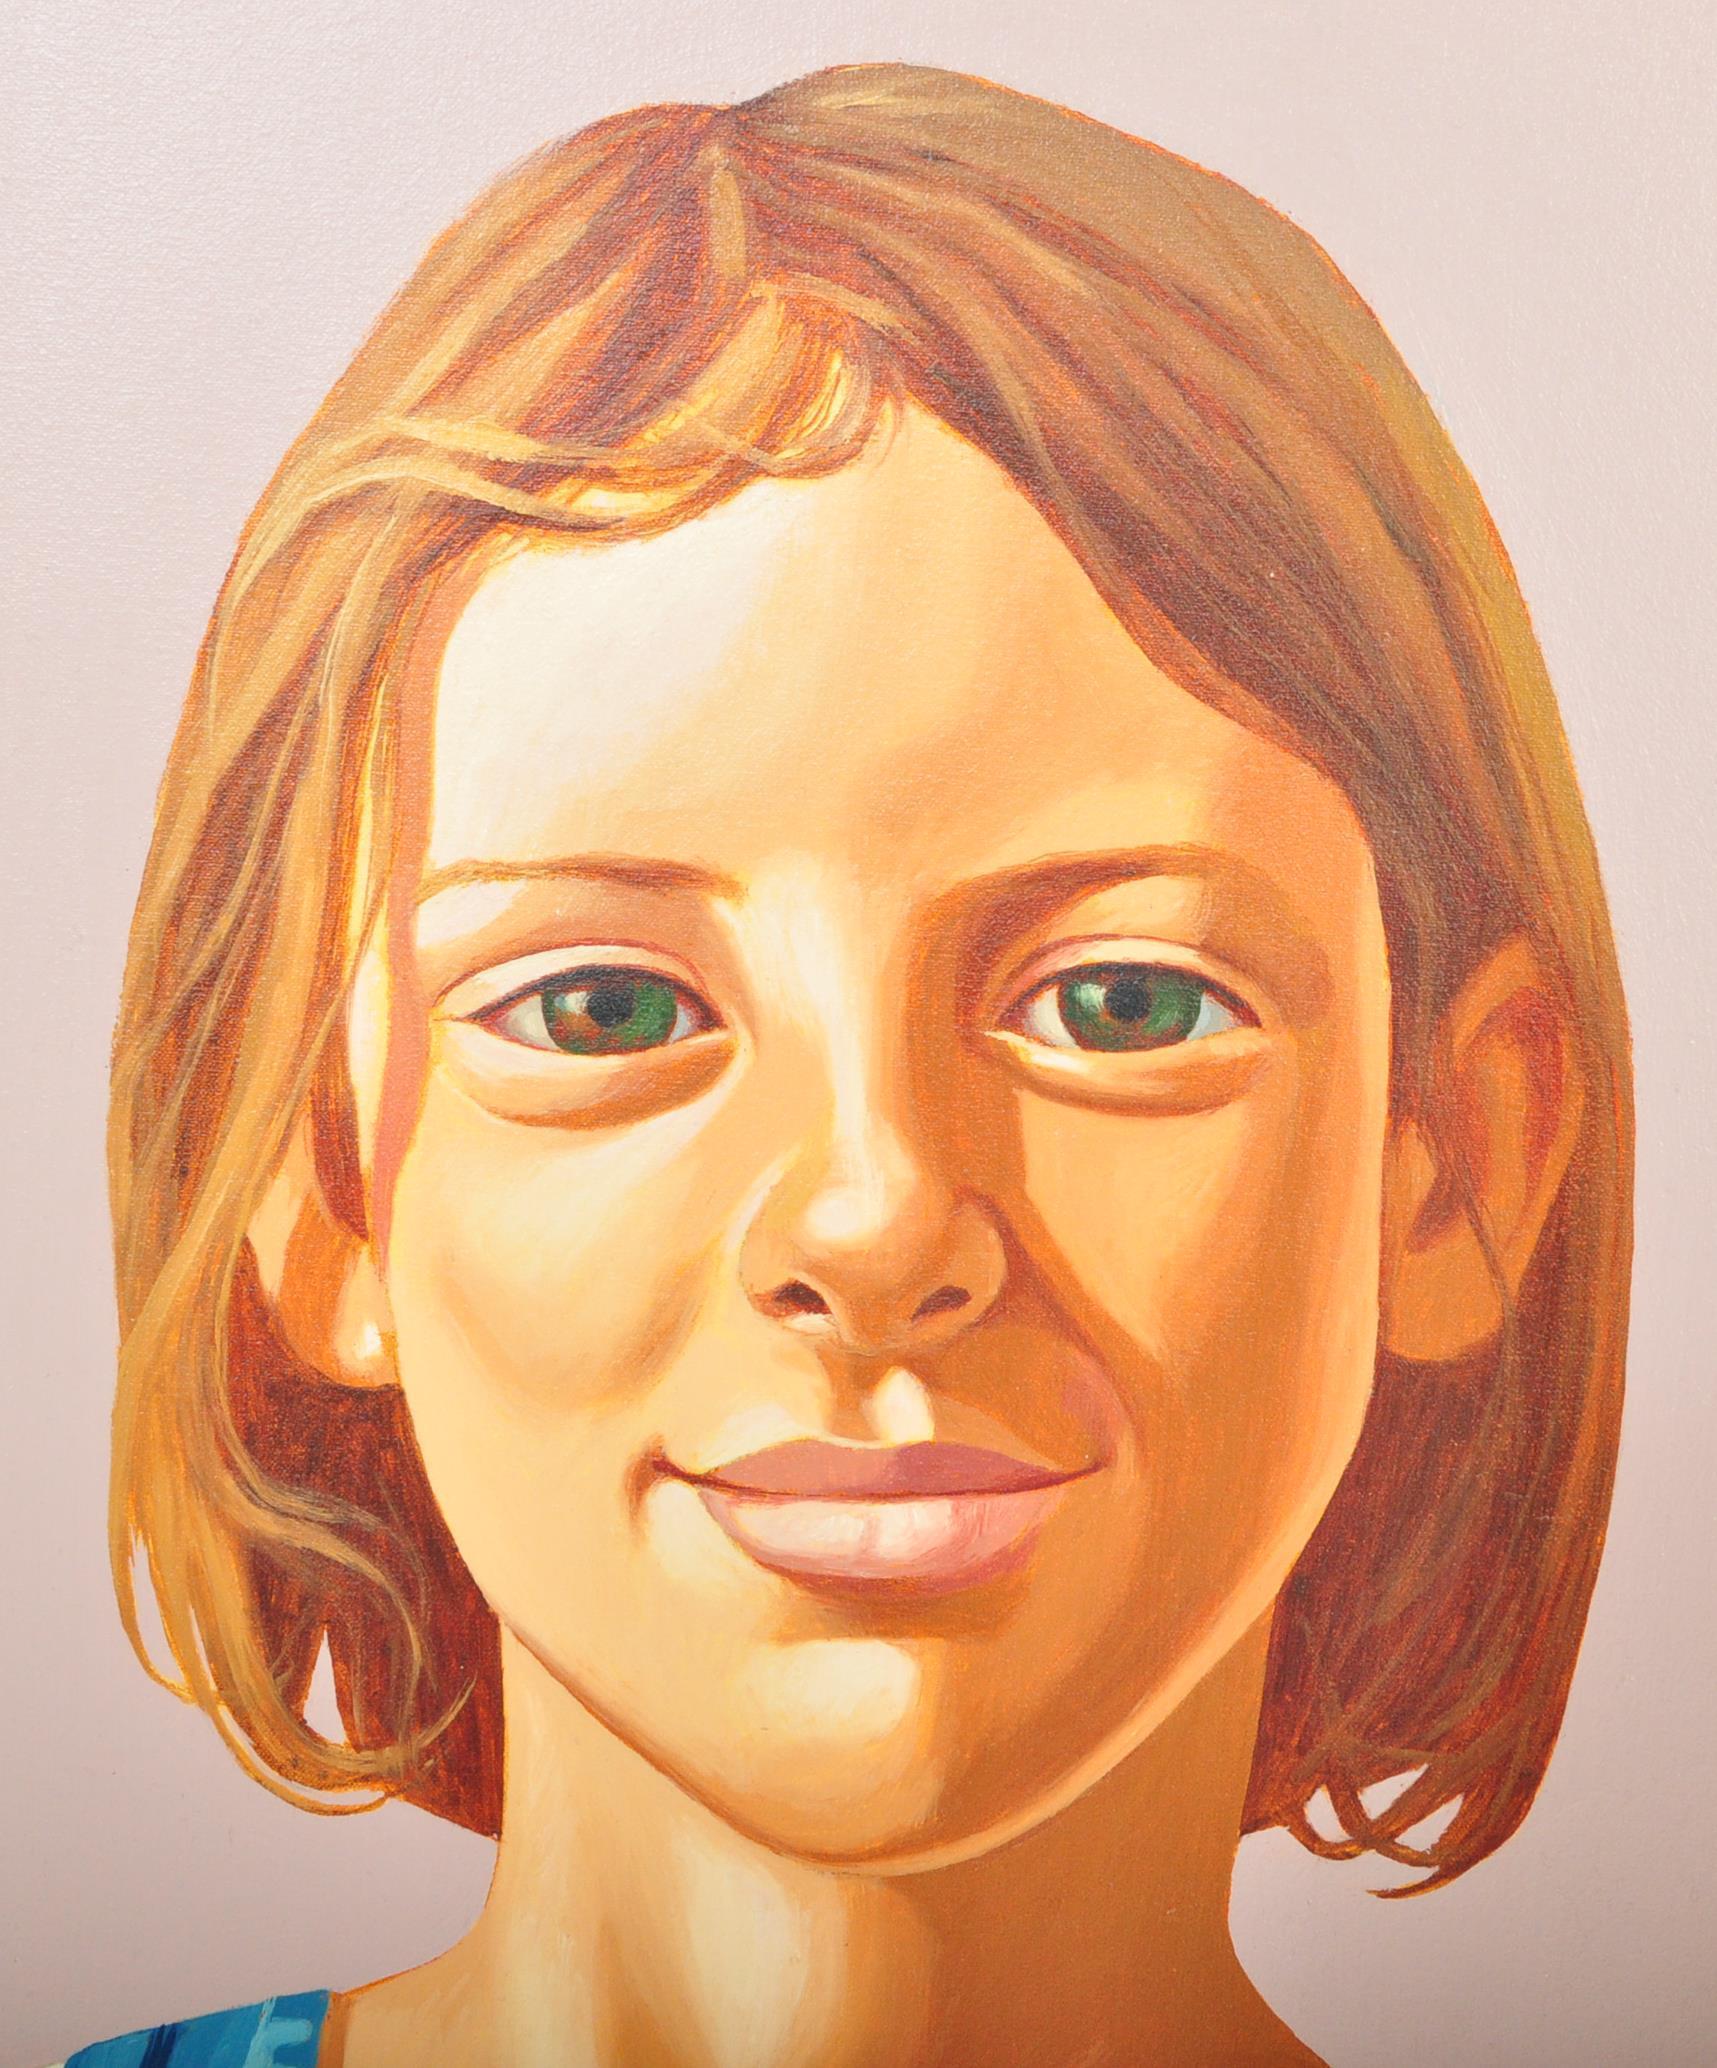 PETER BULLEN - PORTRAIT OF LILY - ACRYLIC ON CANVAS PAINTING - Image 2 of 3